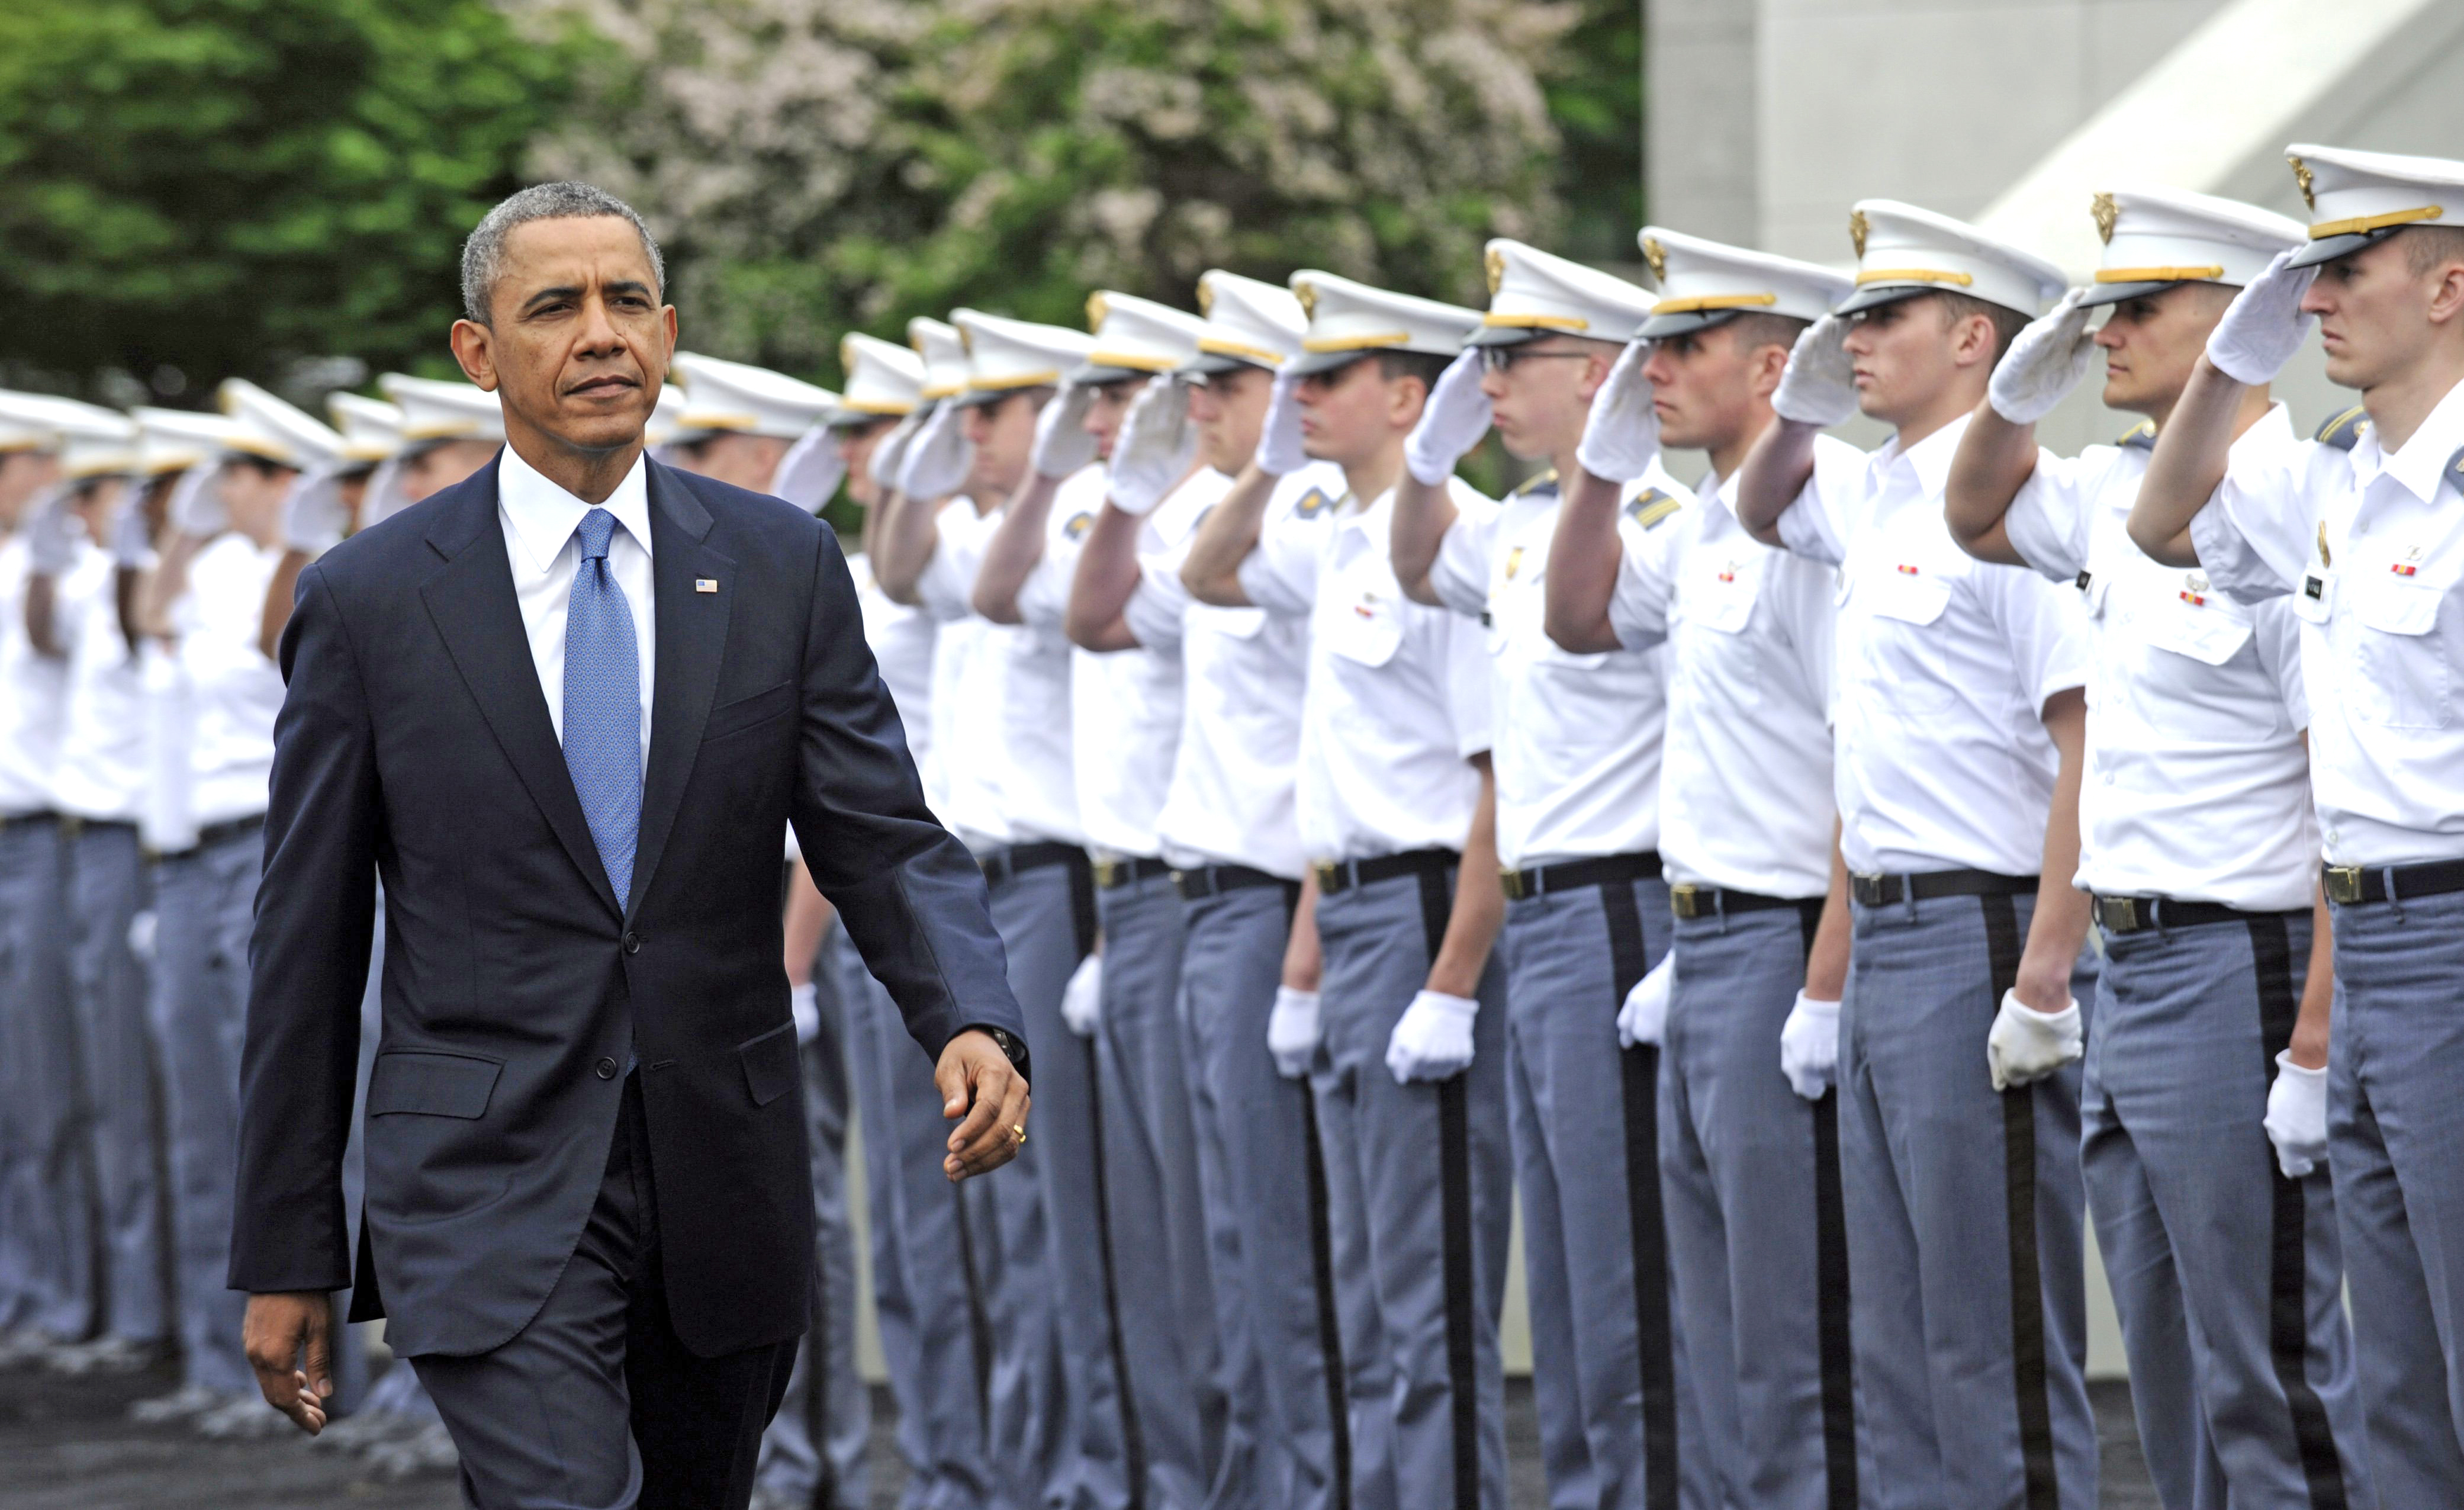 U.S. President Barack Obama arrives to deliver the commencement address to the U.S. Military Academy at West Point's Class of 2014 on May 28, 2014, in West Point, N.Y. (Susan Walsh—AP)